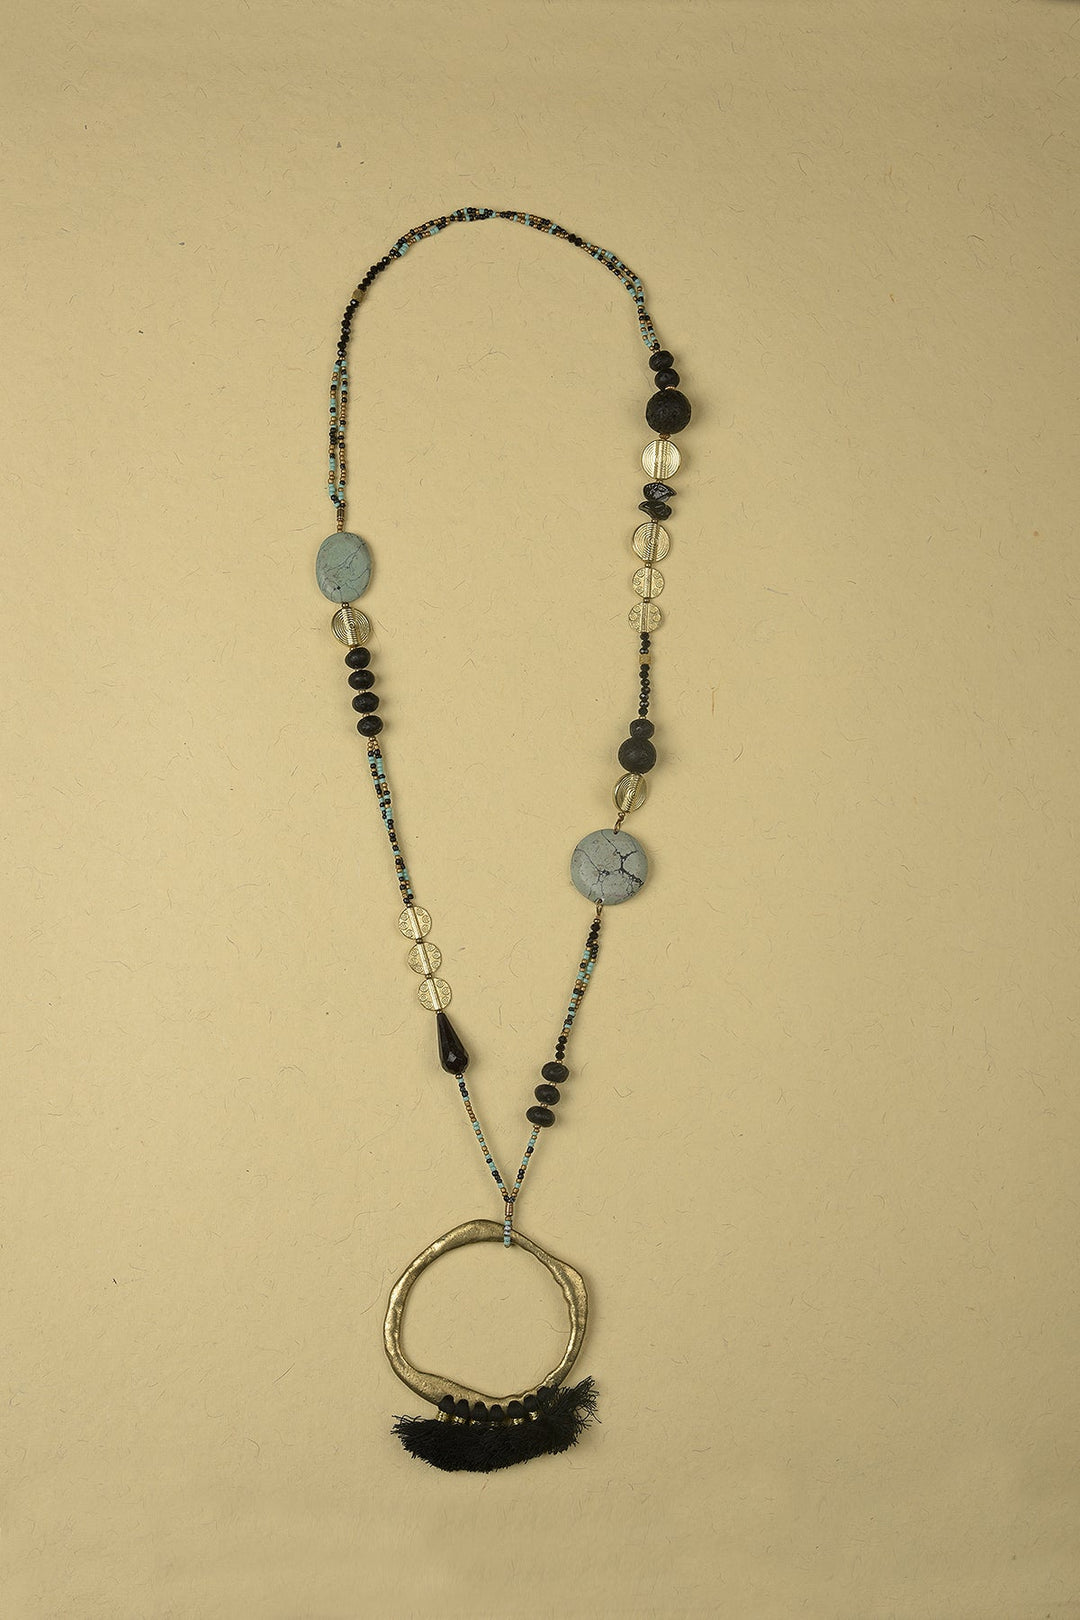 Long Necklace made of Beads, Stones, Thread and Iron Metal